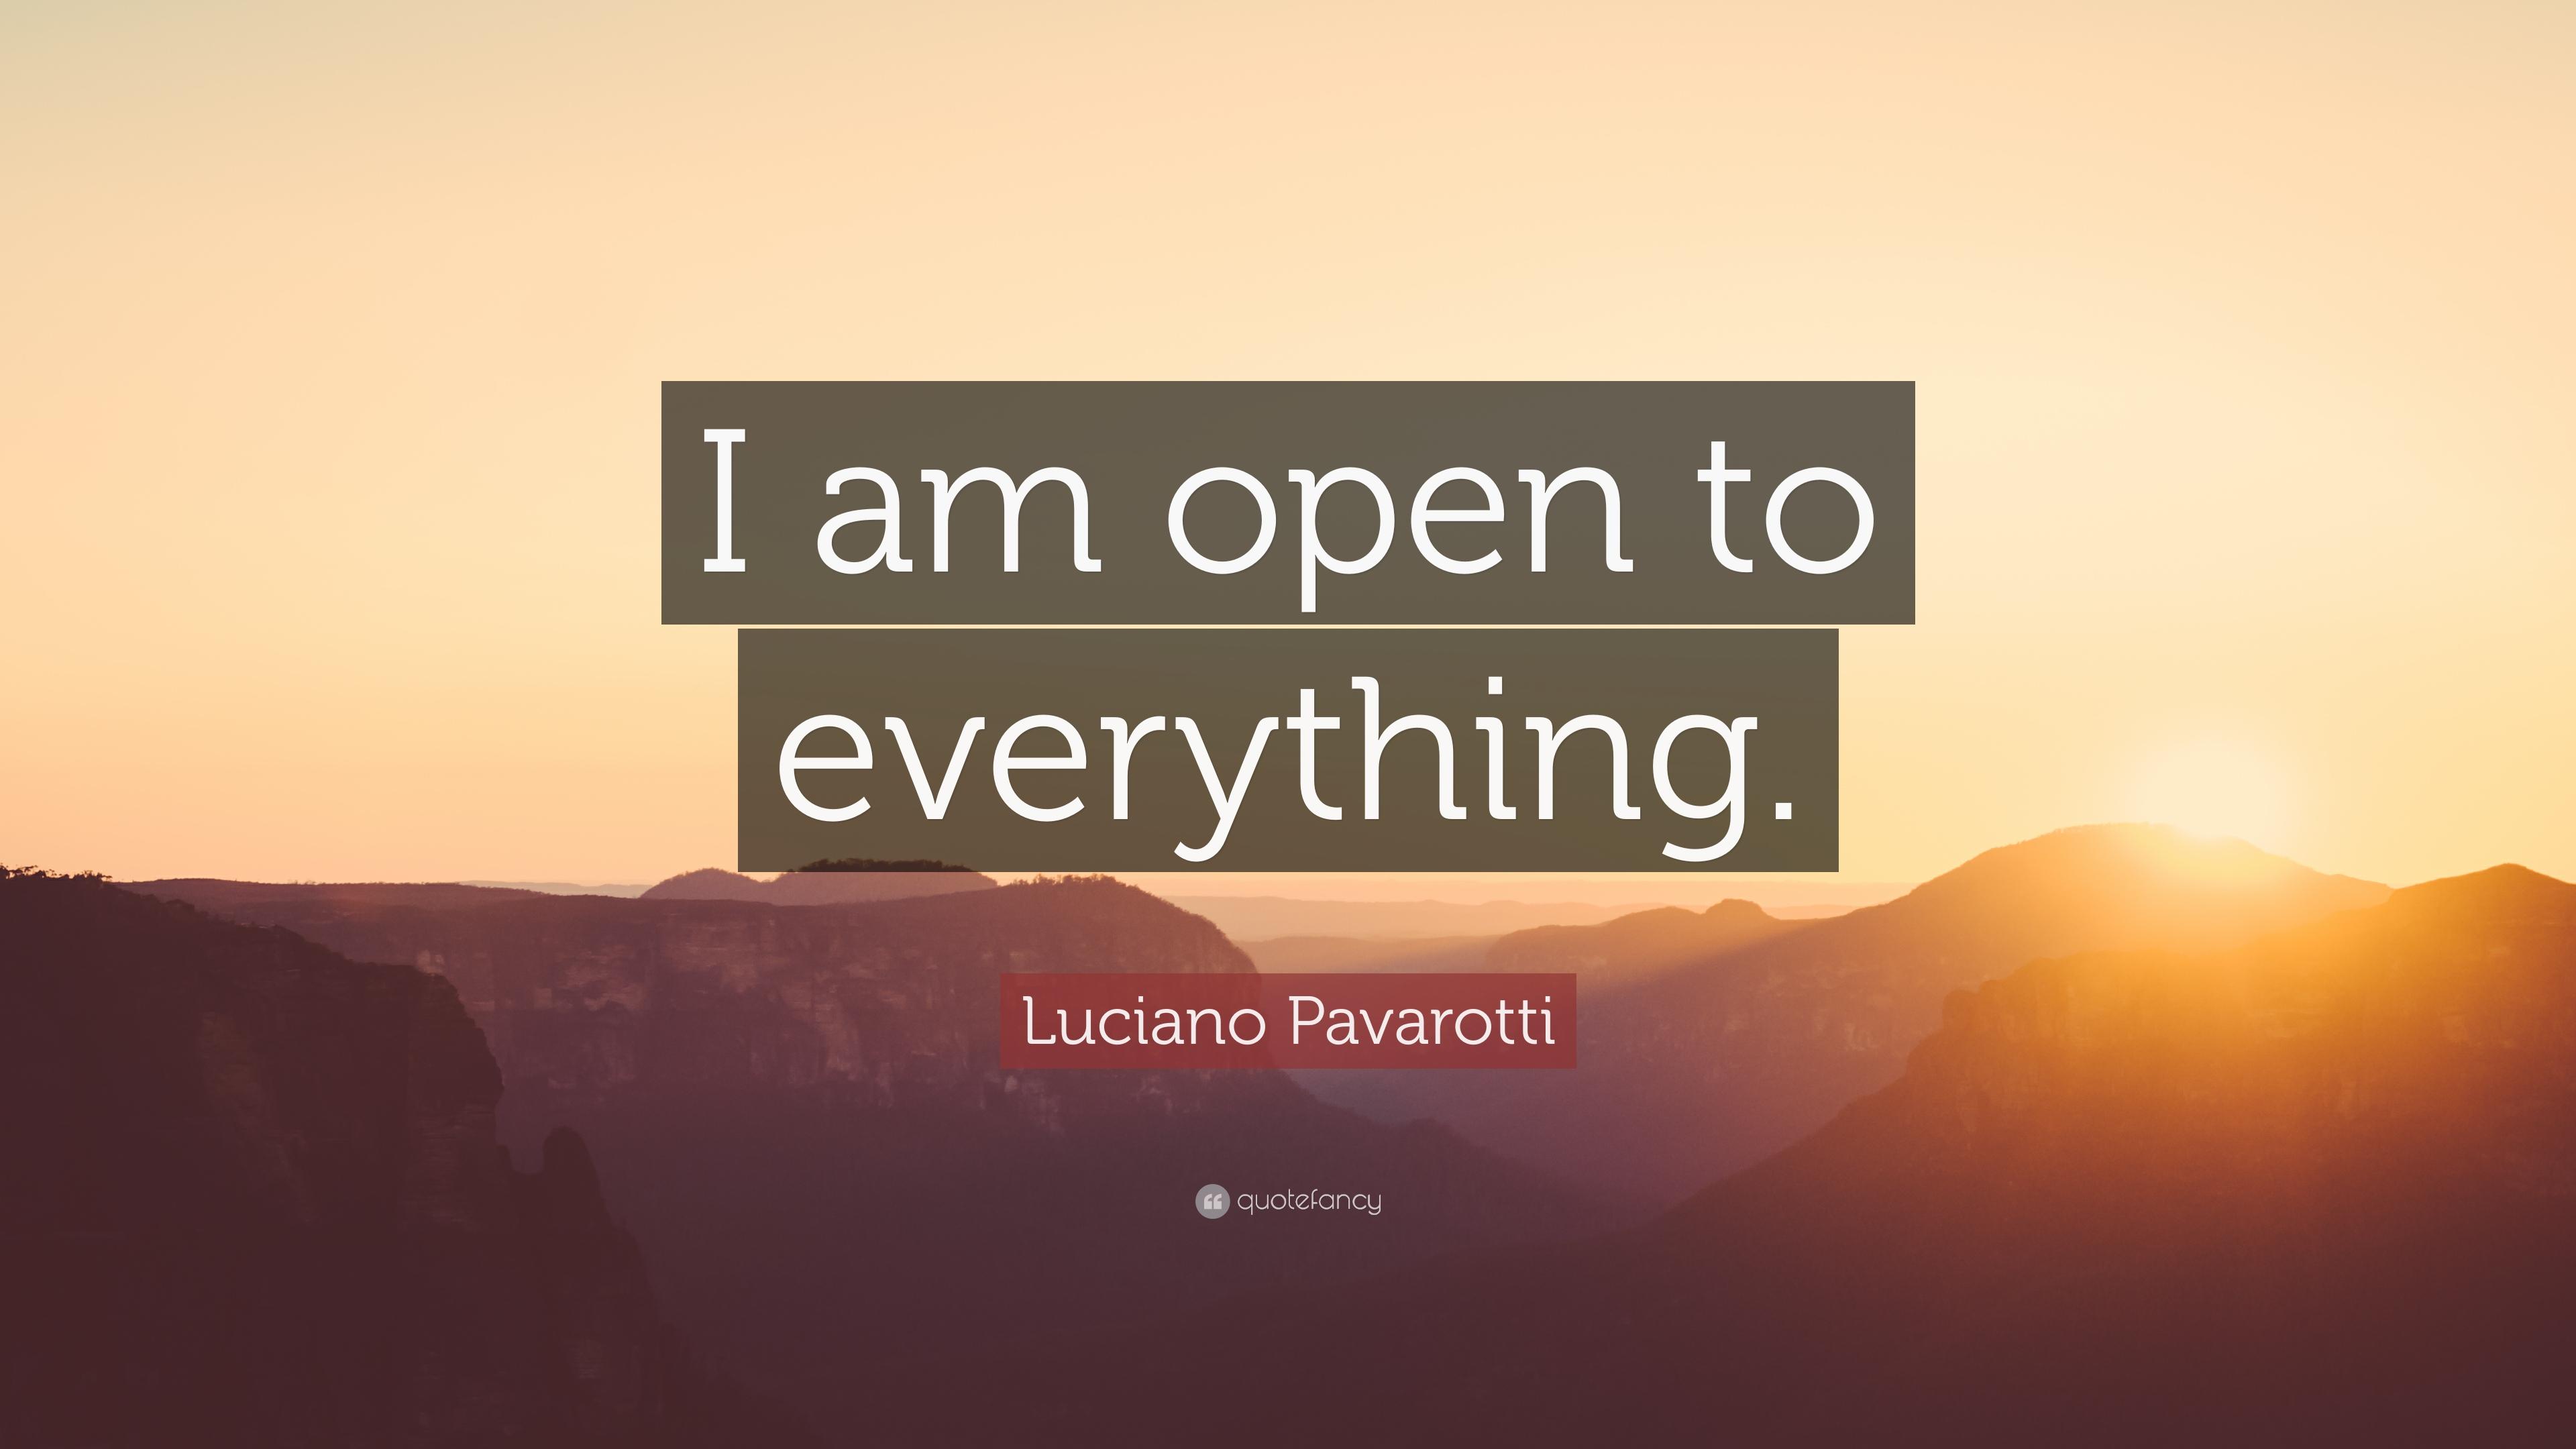 Luciano Pavarotti Quote: “I am open to everything.” 7 wallpaper